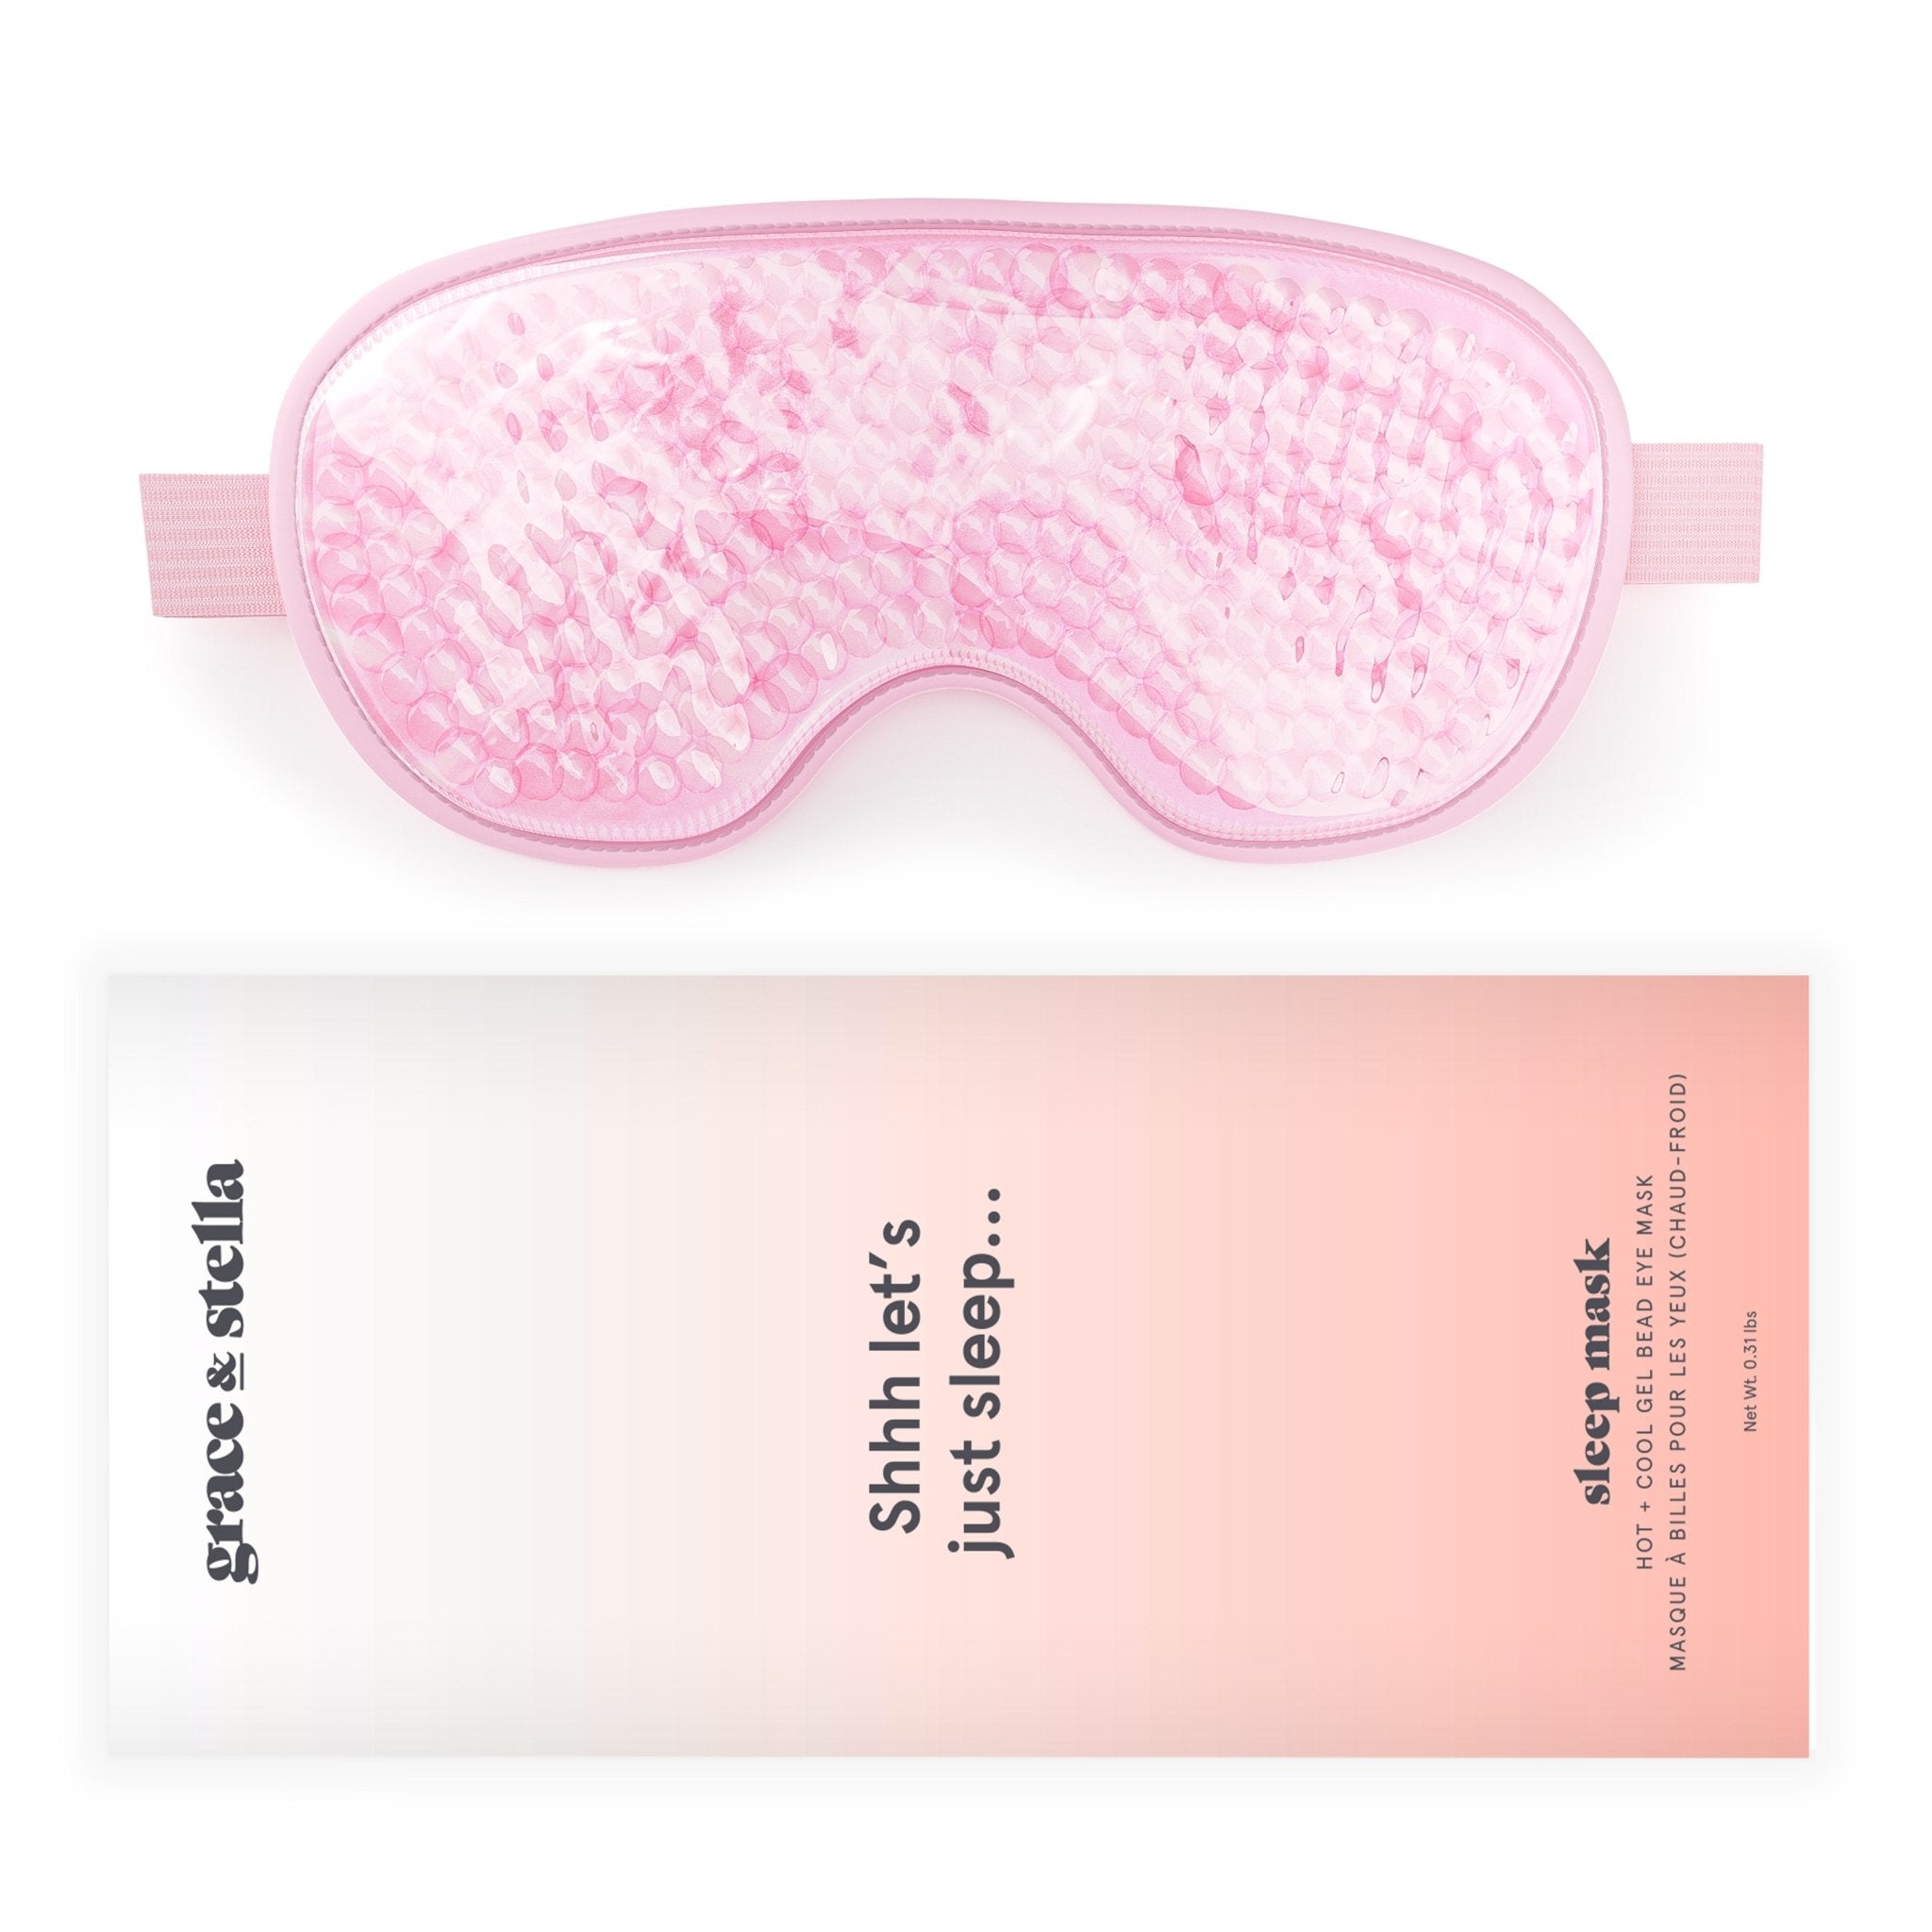 Shh, Let's Just Sleep' Hot + Cold Bead Eye Mask by grace & stella